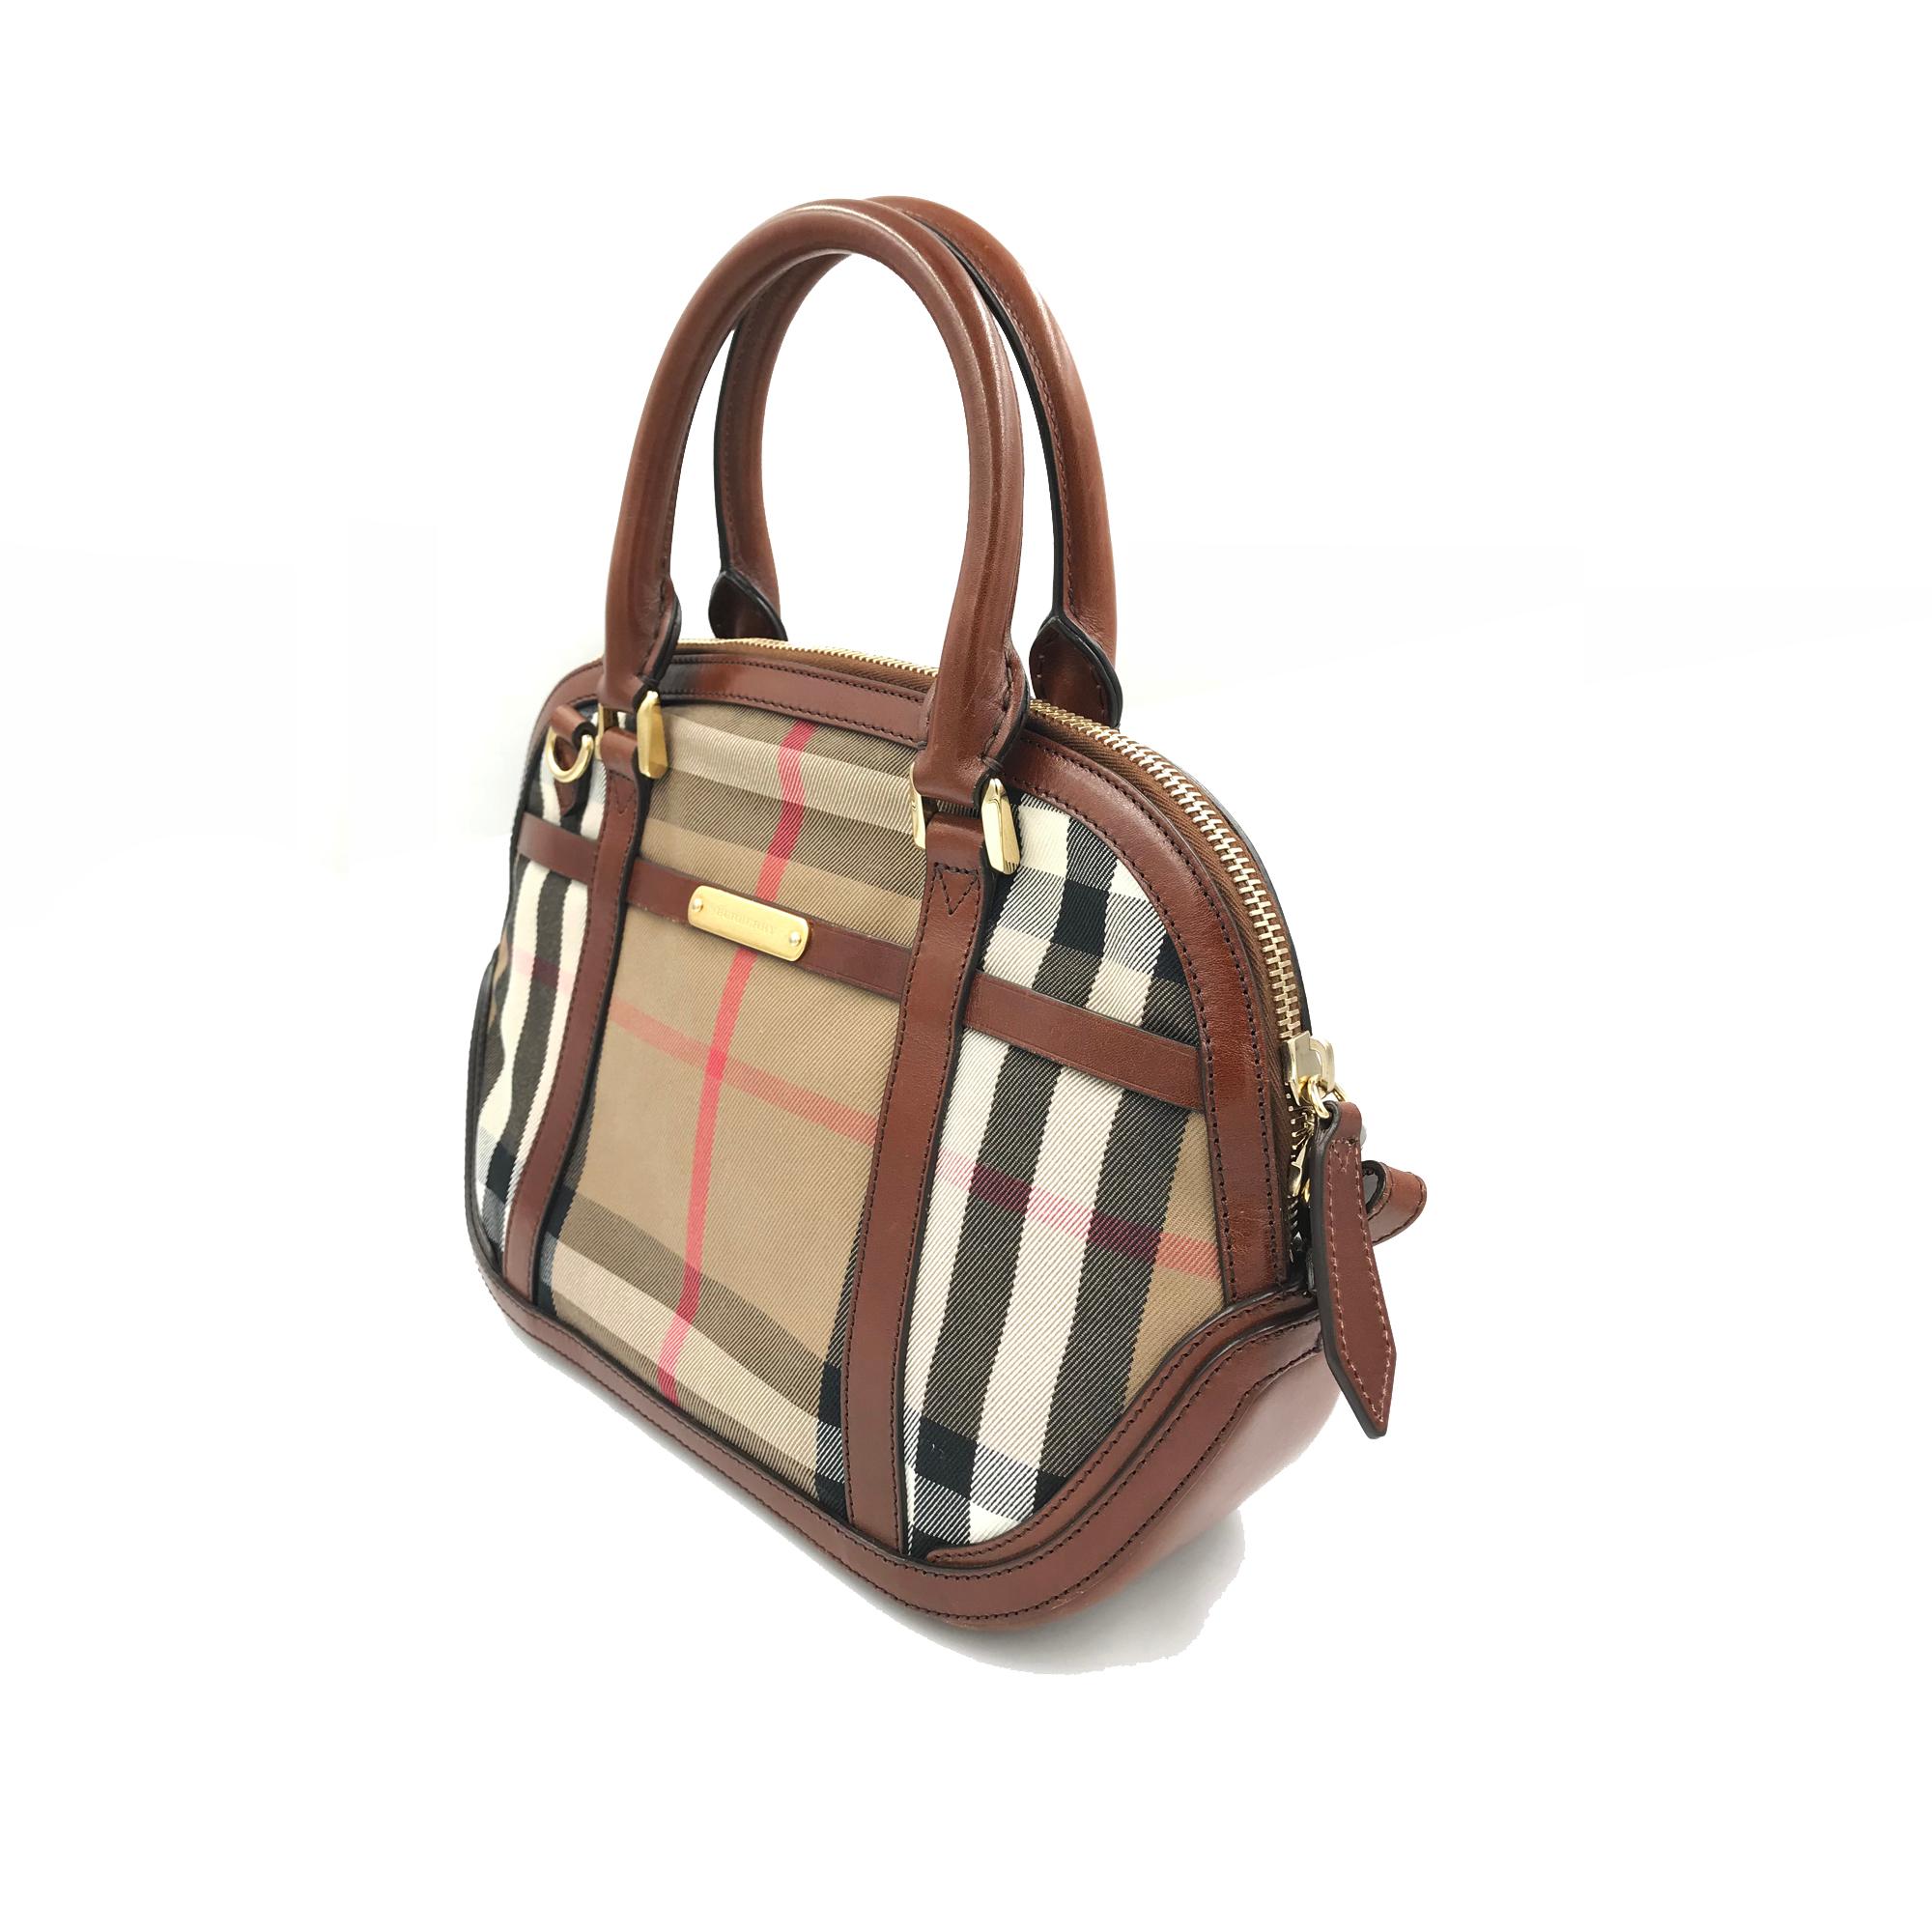 Brown leather and cotton cotton 'Orchard' tote from Burberry featuring a nude and black Haymarket check body. a gold-tone zip up fastening, two short rounded handles to the top, a detachable shoulder strap, a padlock charm detail to the front and a